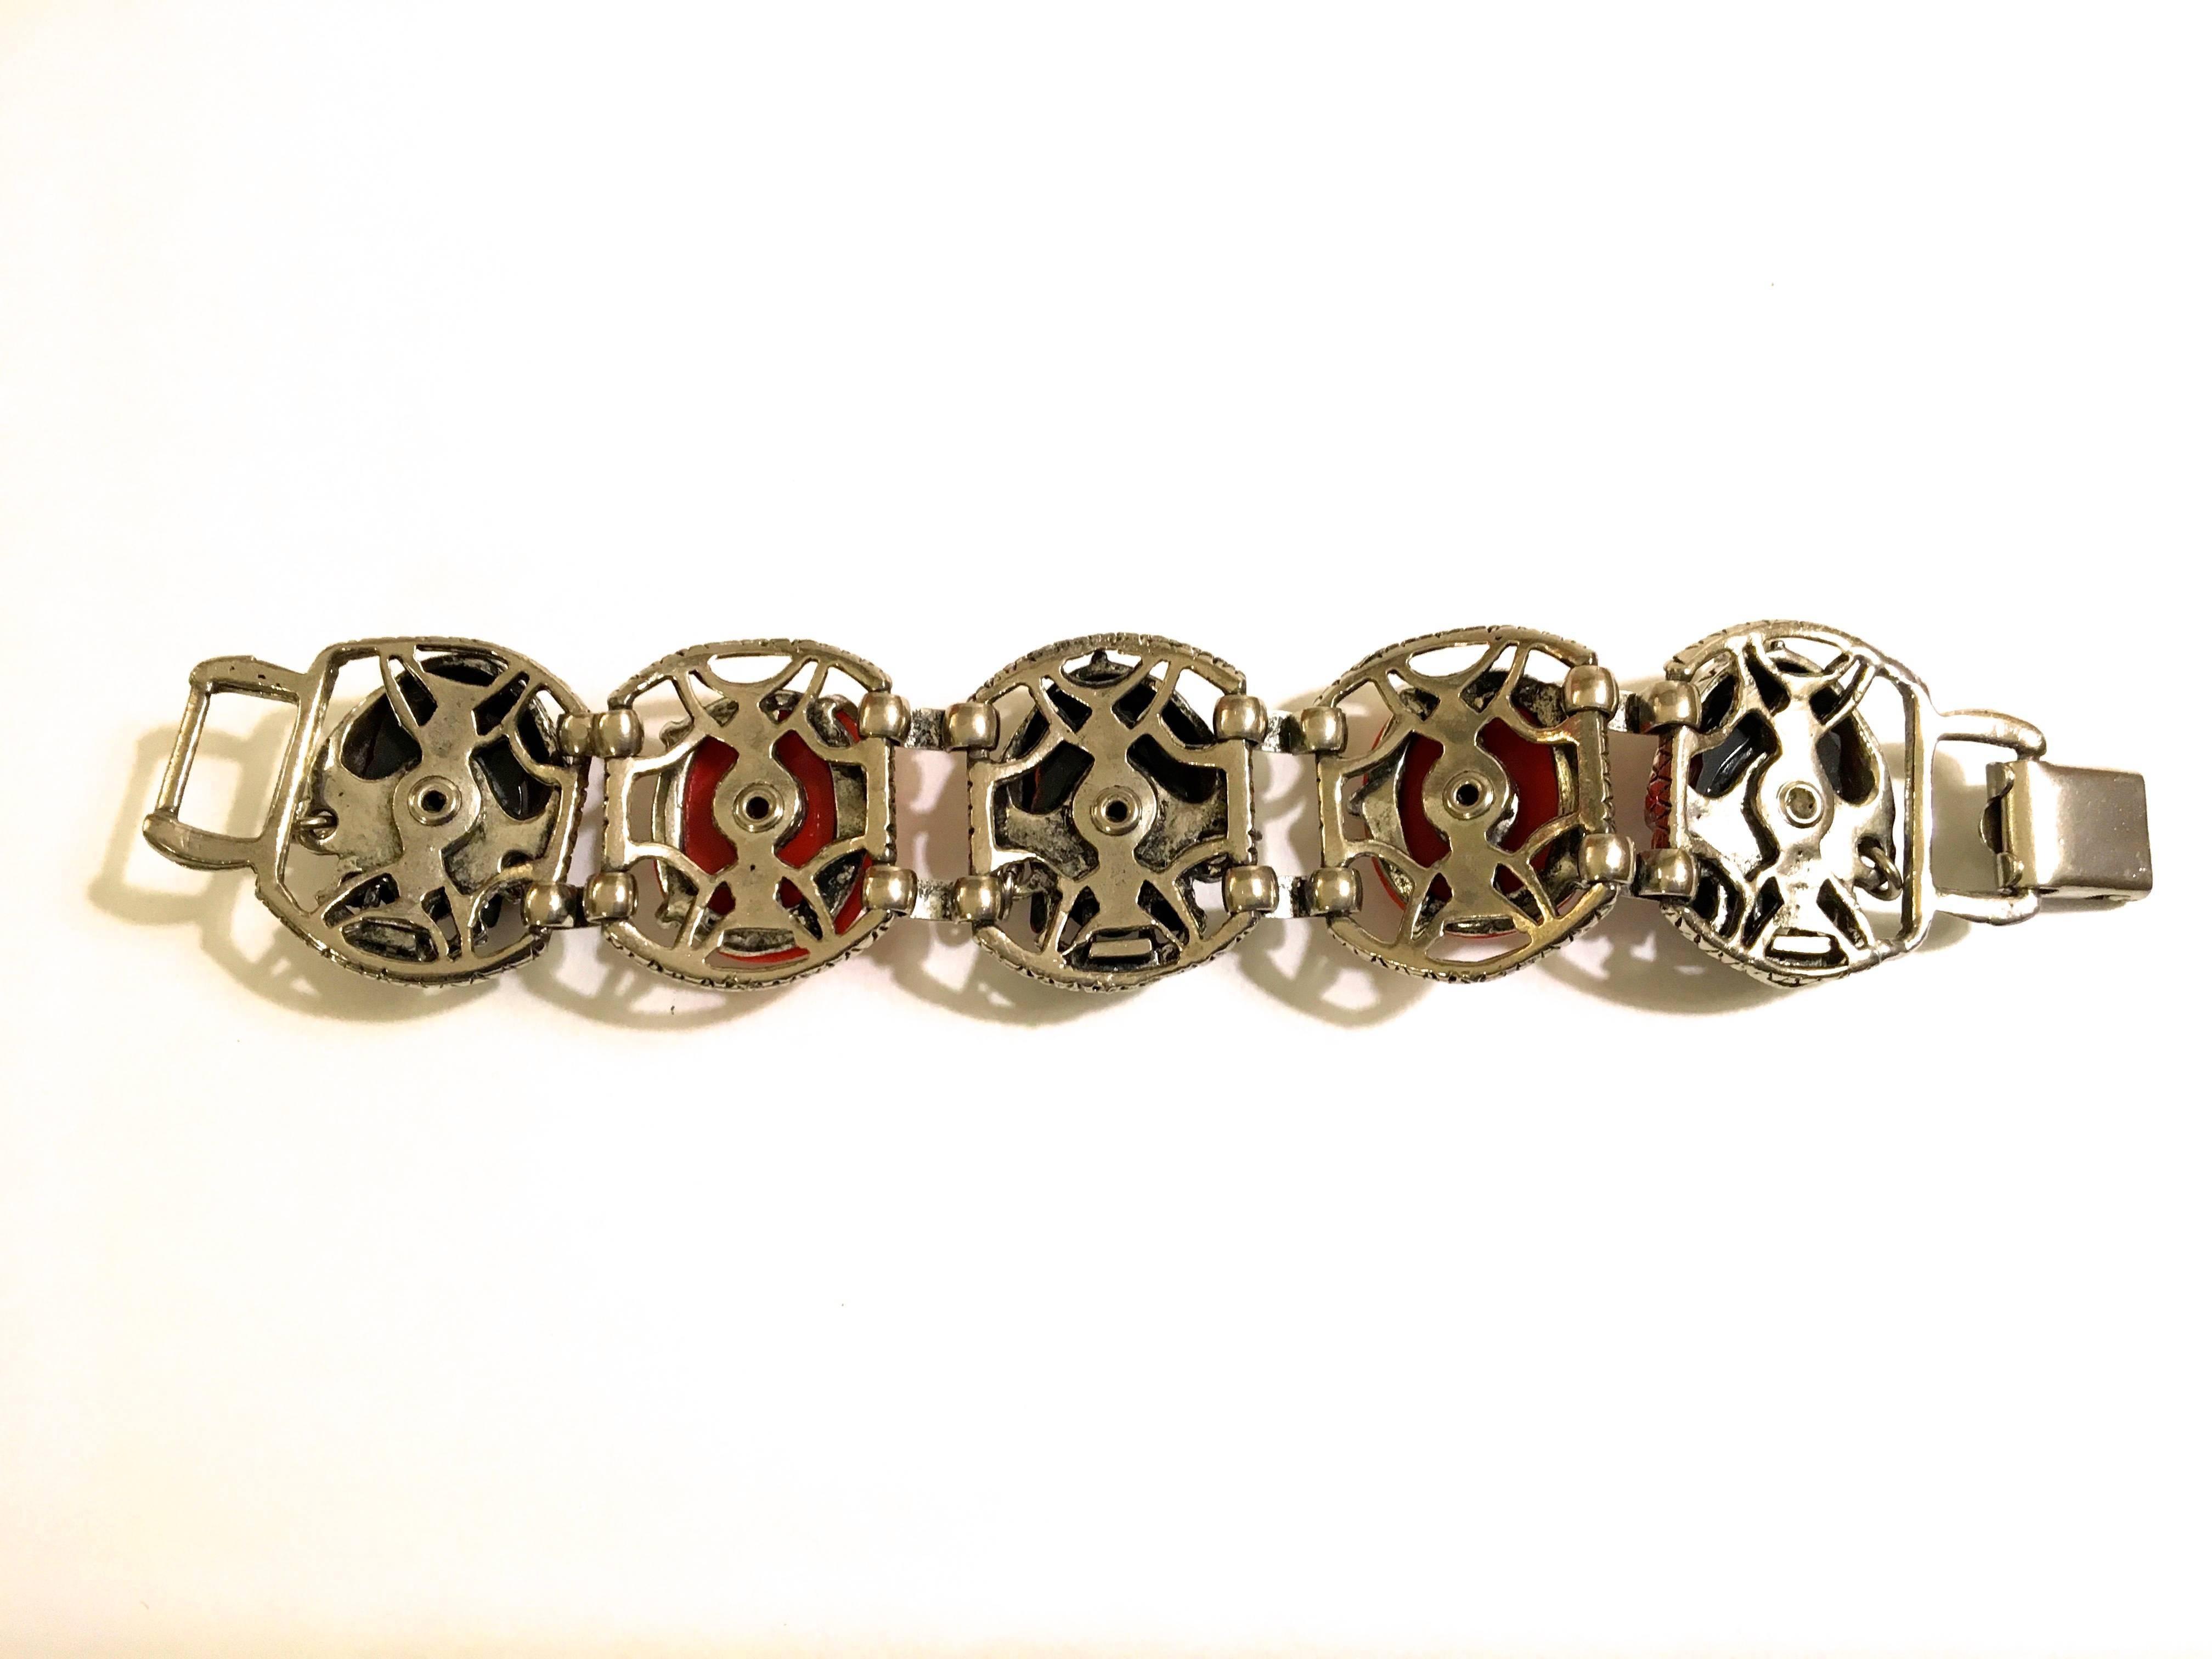 Presented here is a beautiful asian princess bracelet. This beautiful bracelet is comprised of a silver tone metal bracelet frame. Within the links of the bracelet, there are asian princess heads with small pearls adorning the head mask. There are